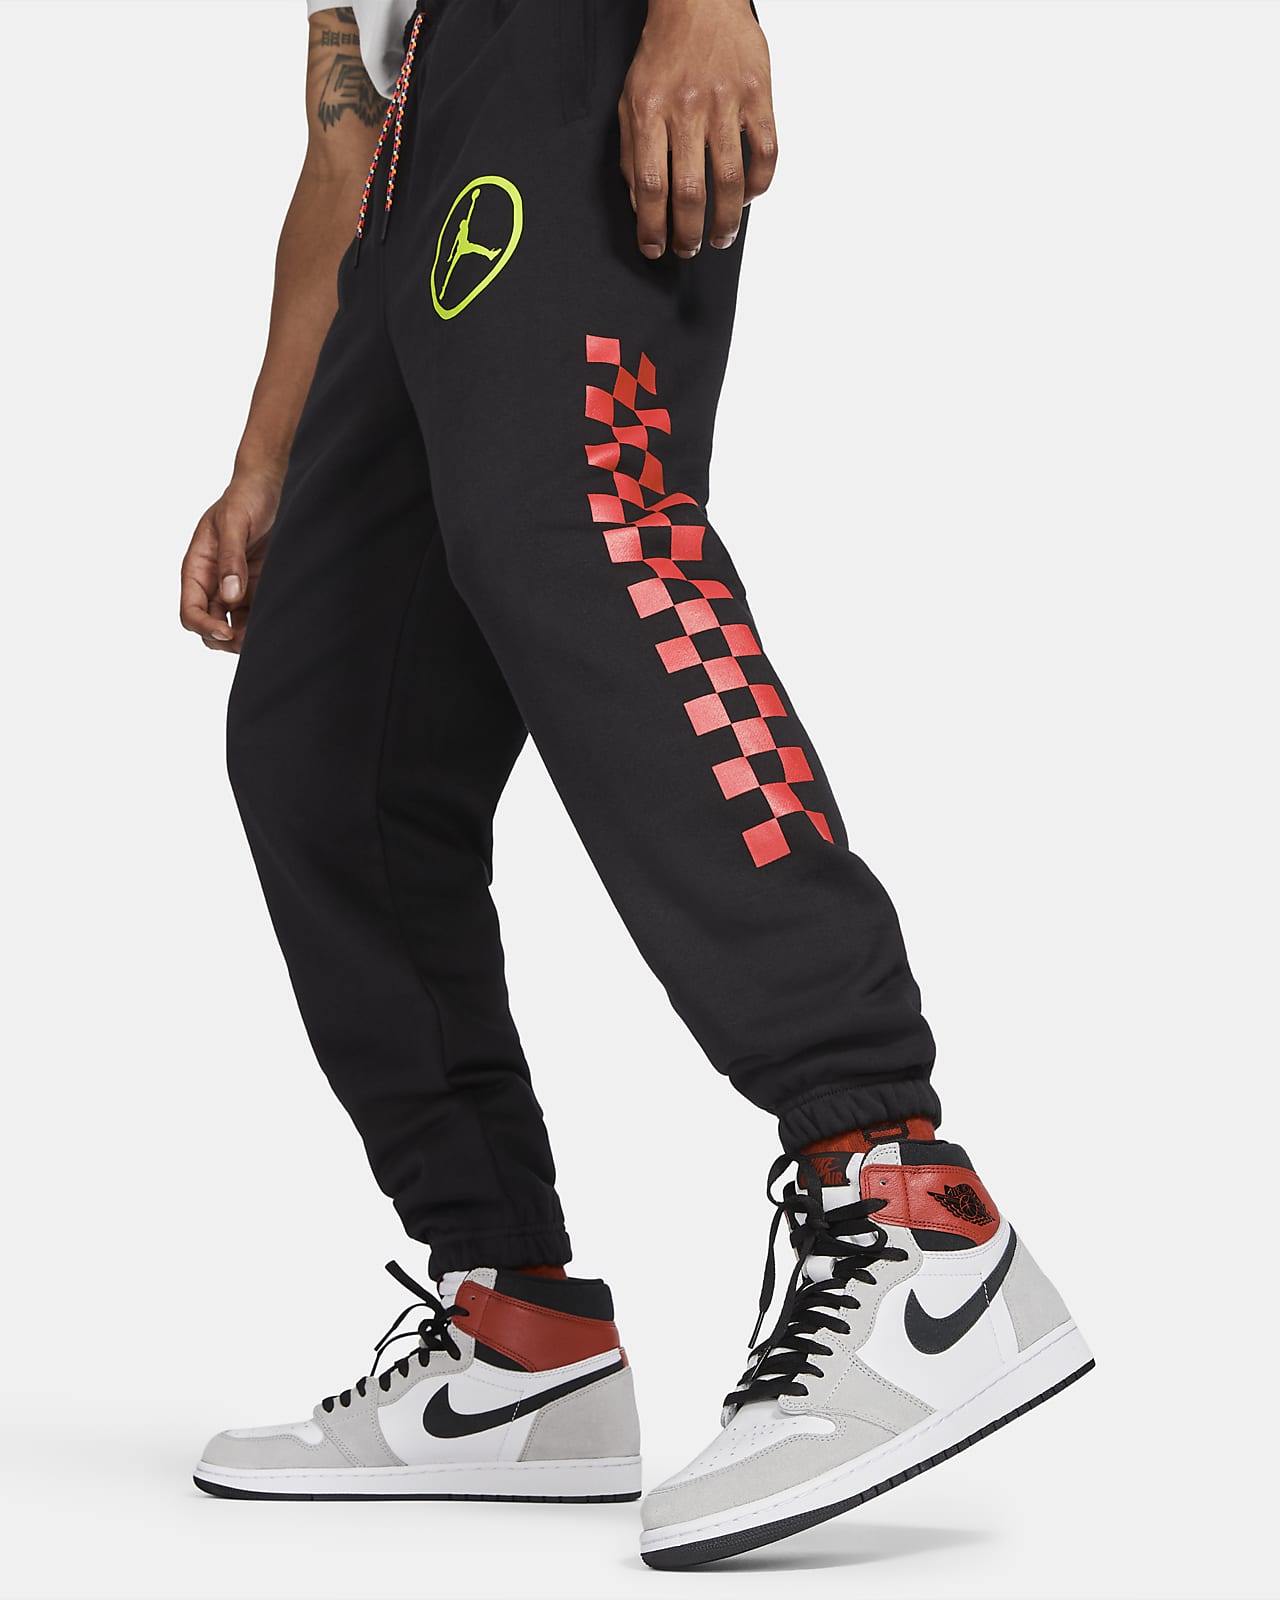 Black sports trousers for men and women with logo embroidery - NIKE -  Pavidas